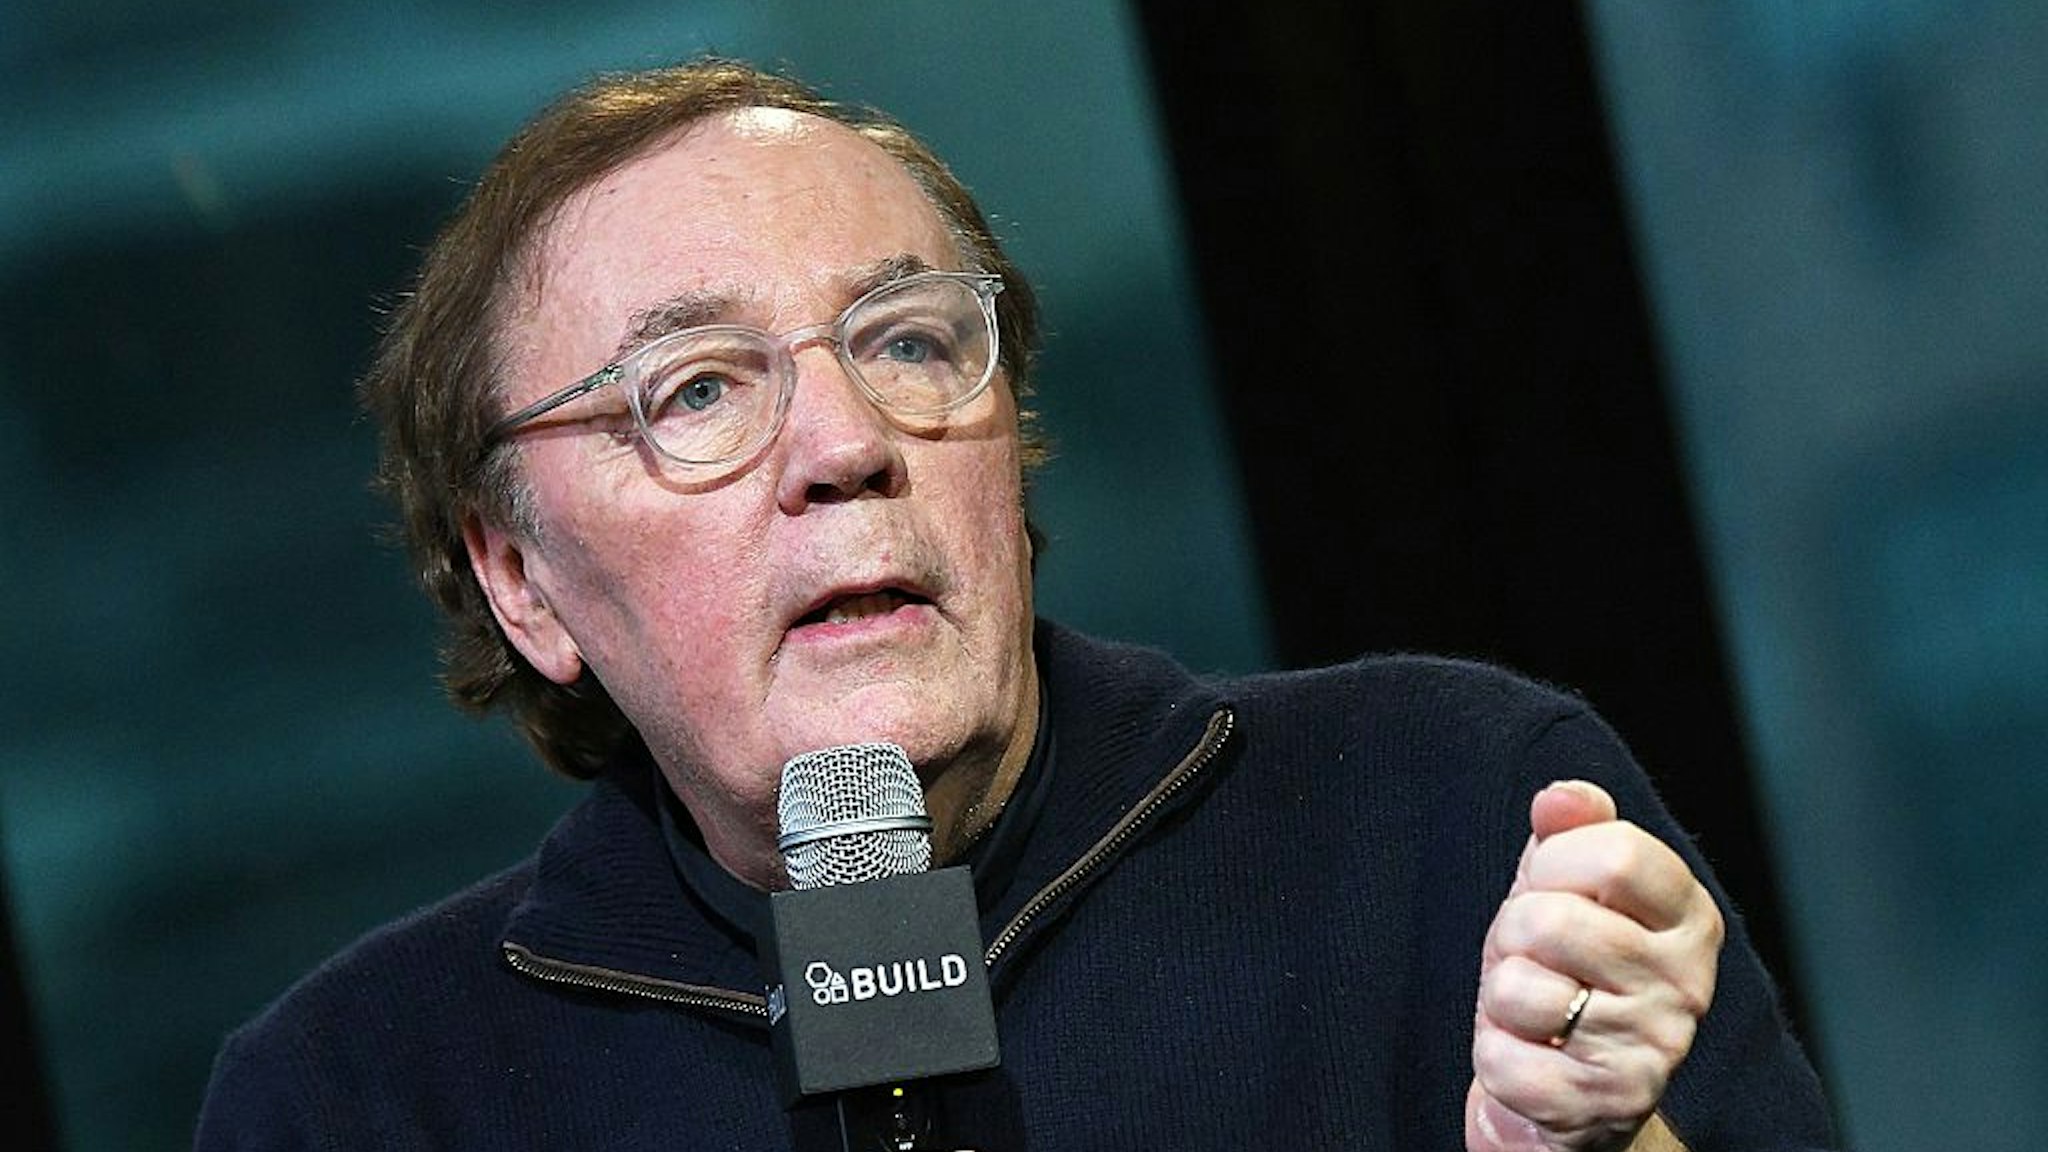 Author James Patterson attends the AOL Build Speaker Series-James Patterson,"MasterClass" at AOL Studios In New York on June 8, 2016 in New York City.